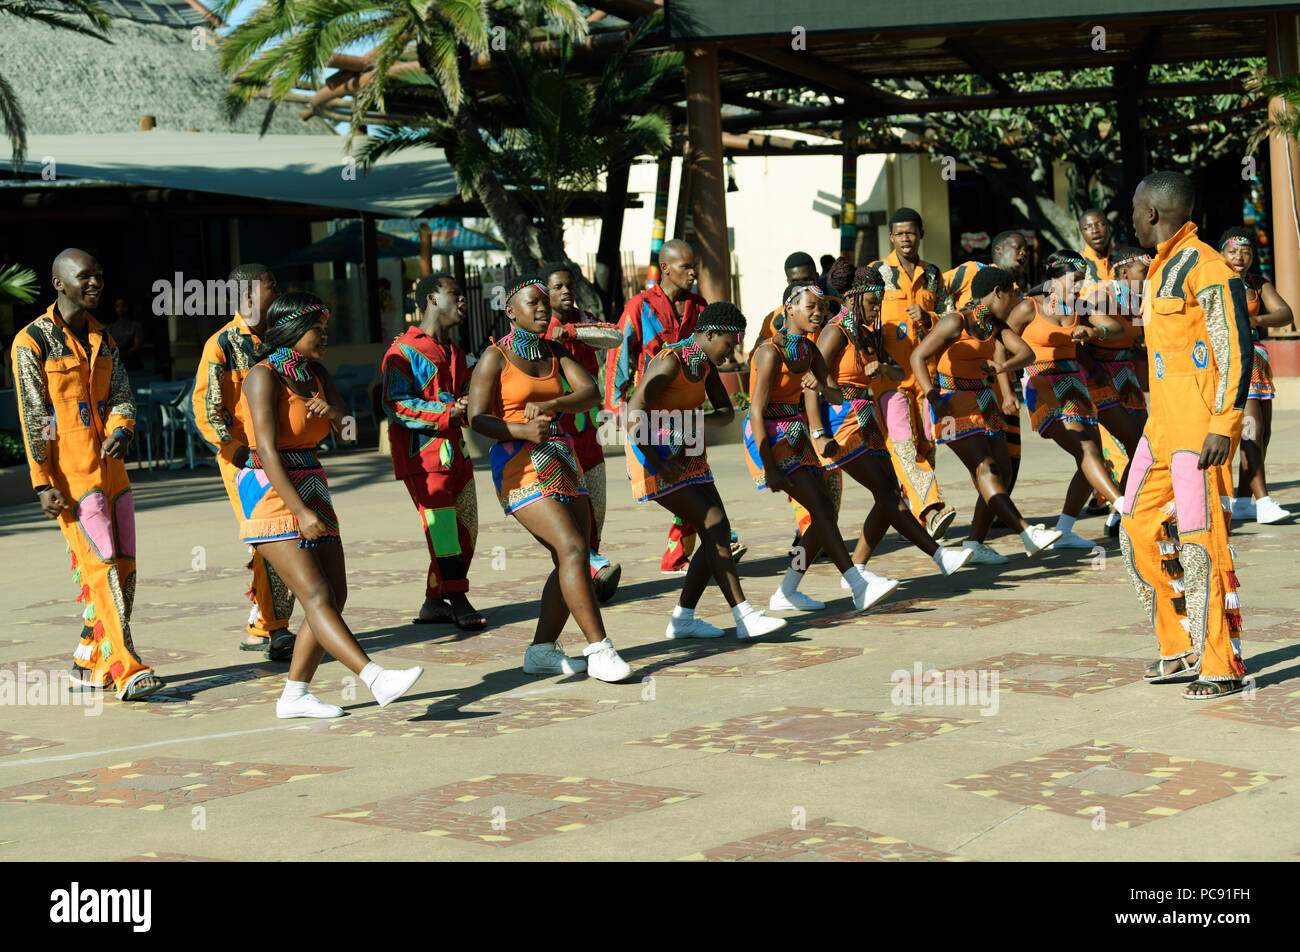 Durban, KwaZulu-Natal, South Africa, young adult Zulu street performers in colourful dress doing synchronised dancing during exhibition Stock Photo